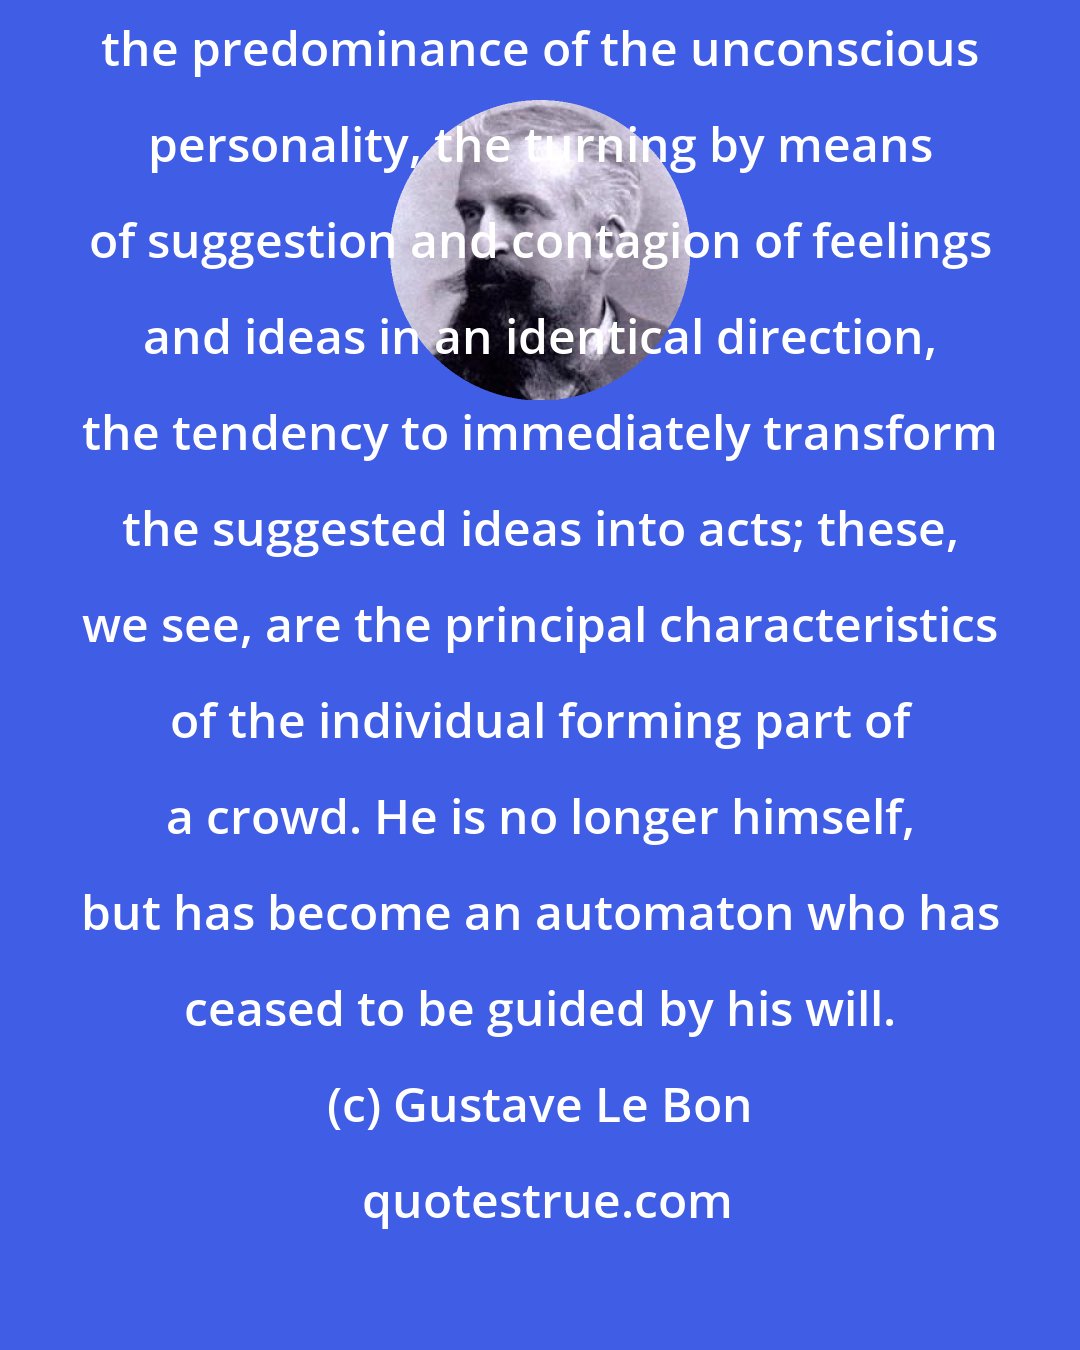 Gustave Le Bon: We see, then, that the disappearance of the conscious personality, the predominance of the unconscious personality, the turning by means of suggestion and contagion of feelings and ideas in an identical direction, the tendency to immediately transform the suggested ideas into acts; these, we see, are the principal characteristics of the individual forming part of a crowd. He is no longer himself, but has become an automaton who has ceased to be guided by his will.